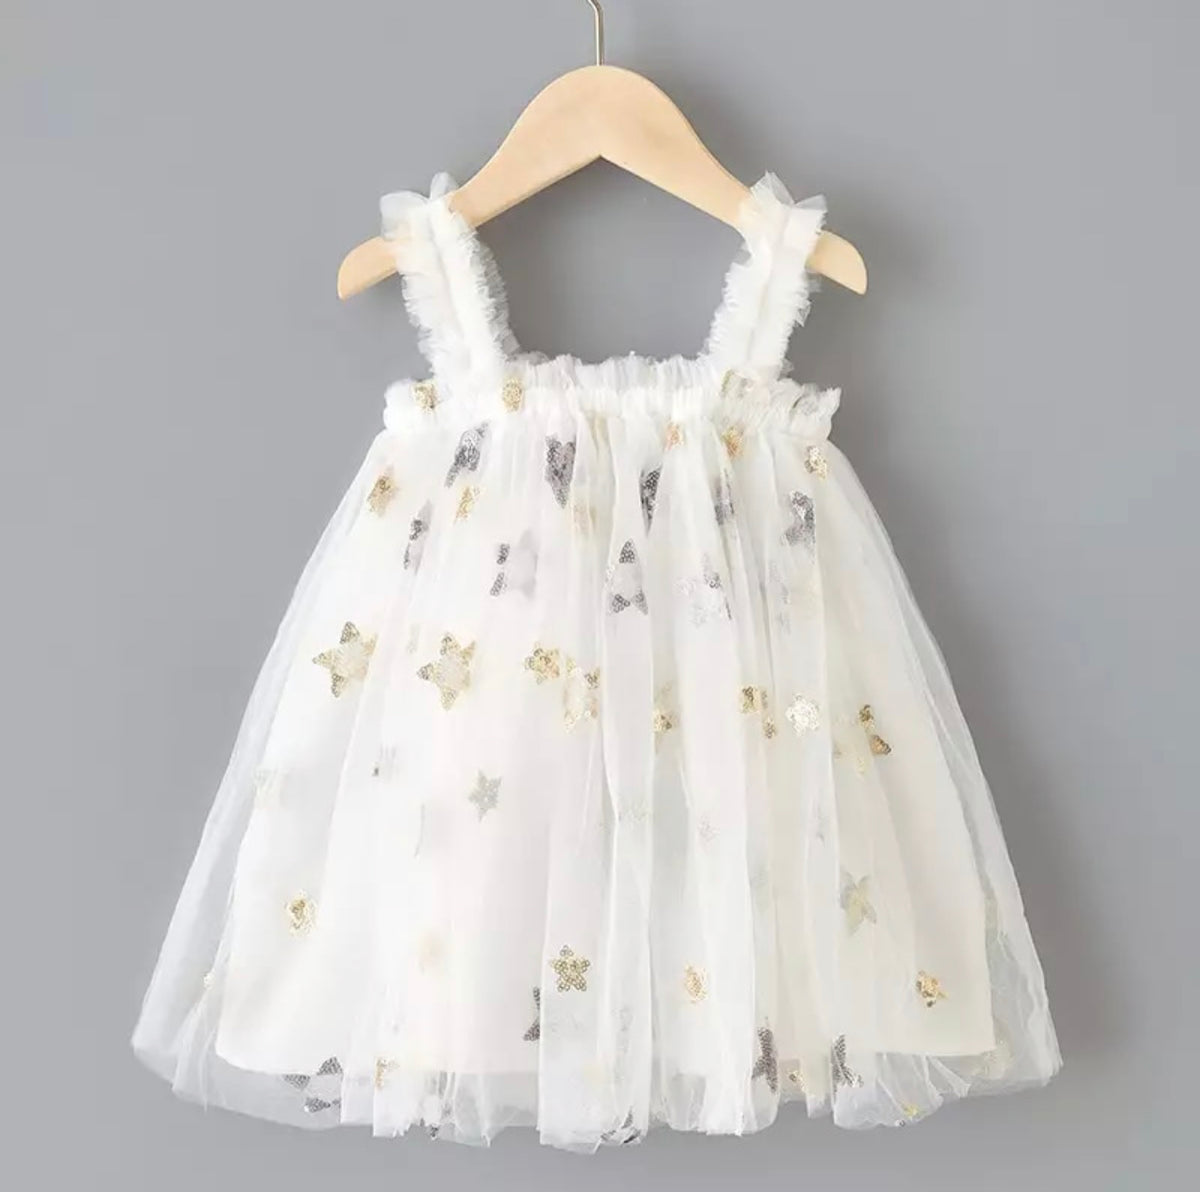 Tulle Star Dreams Dress in White